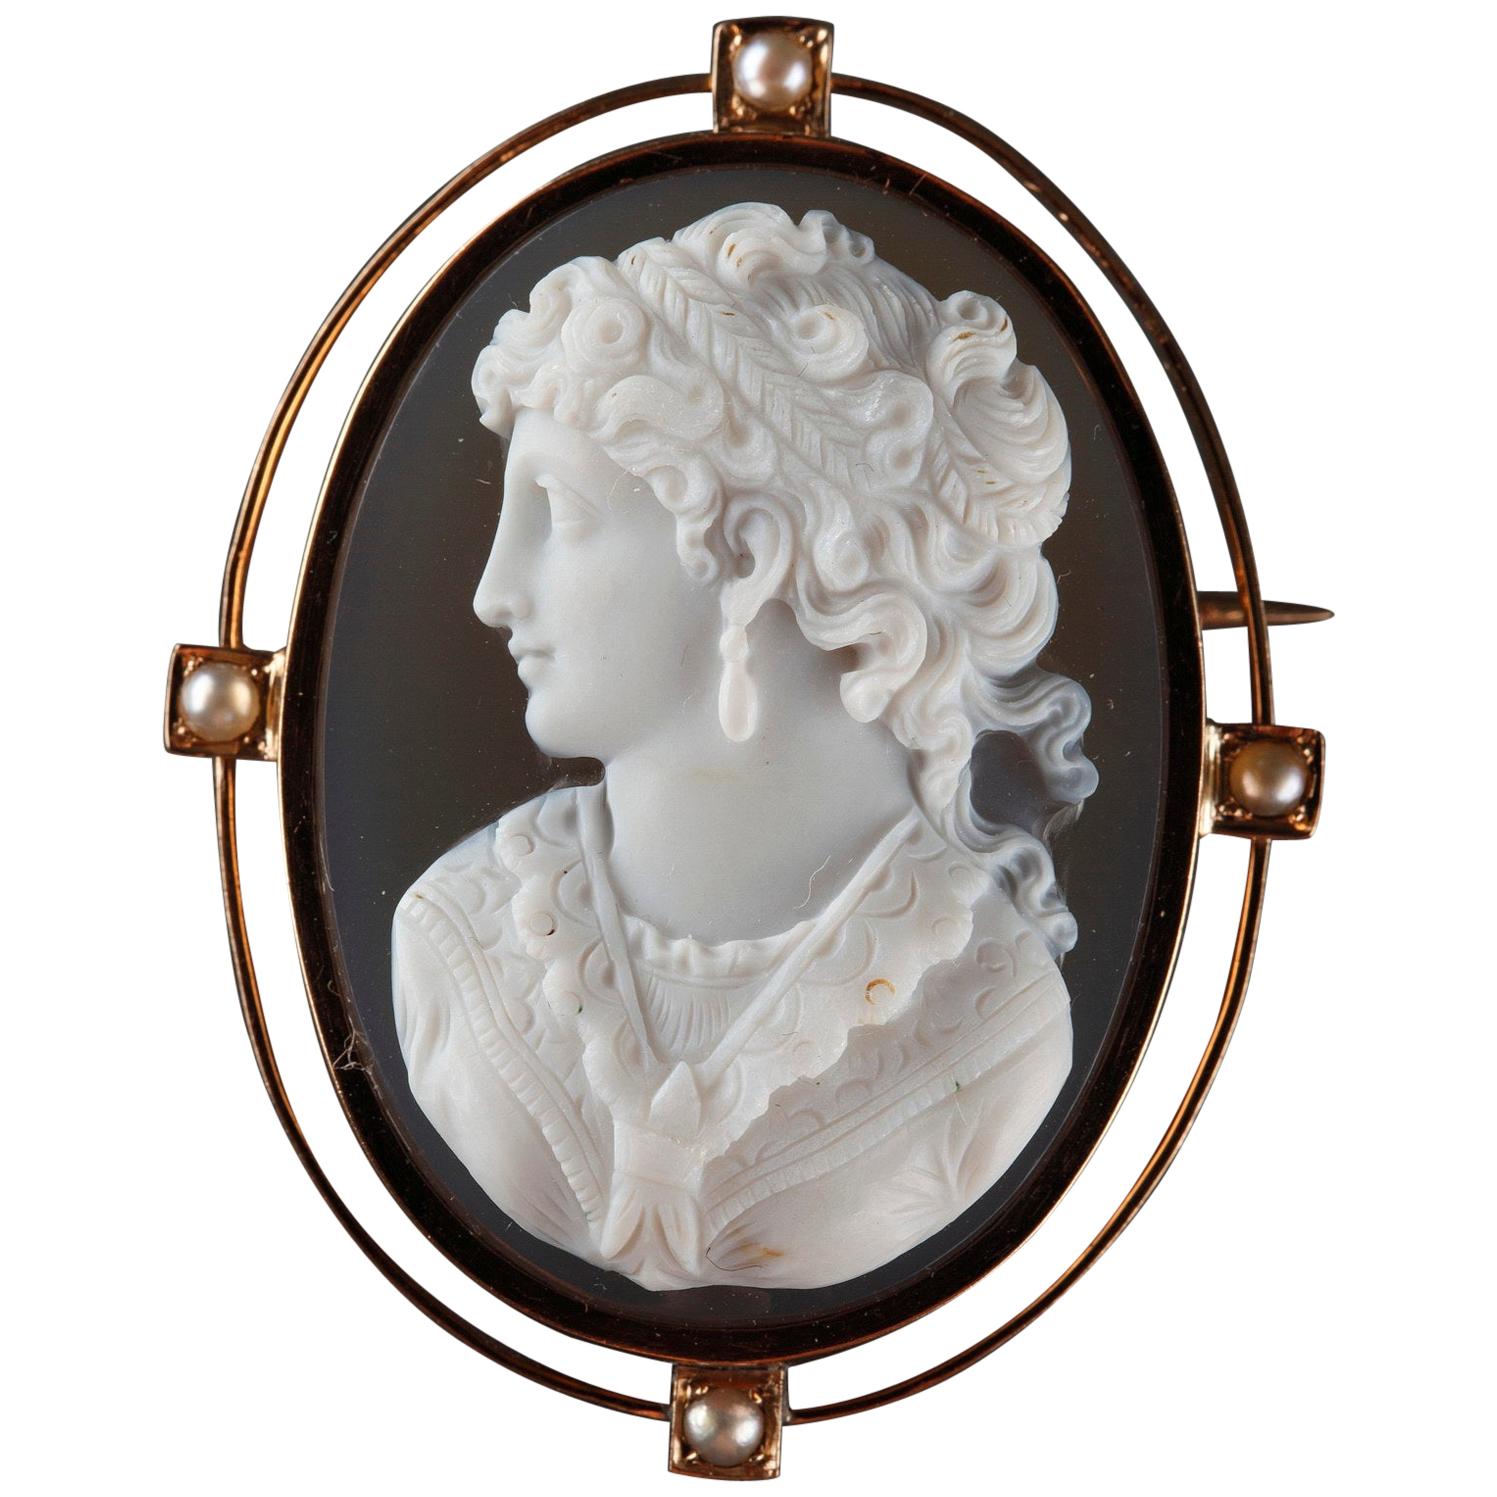 Gold Brooch with Agate Cameo and Pearls, 19th Century